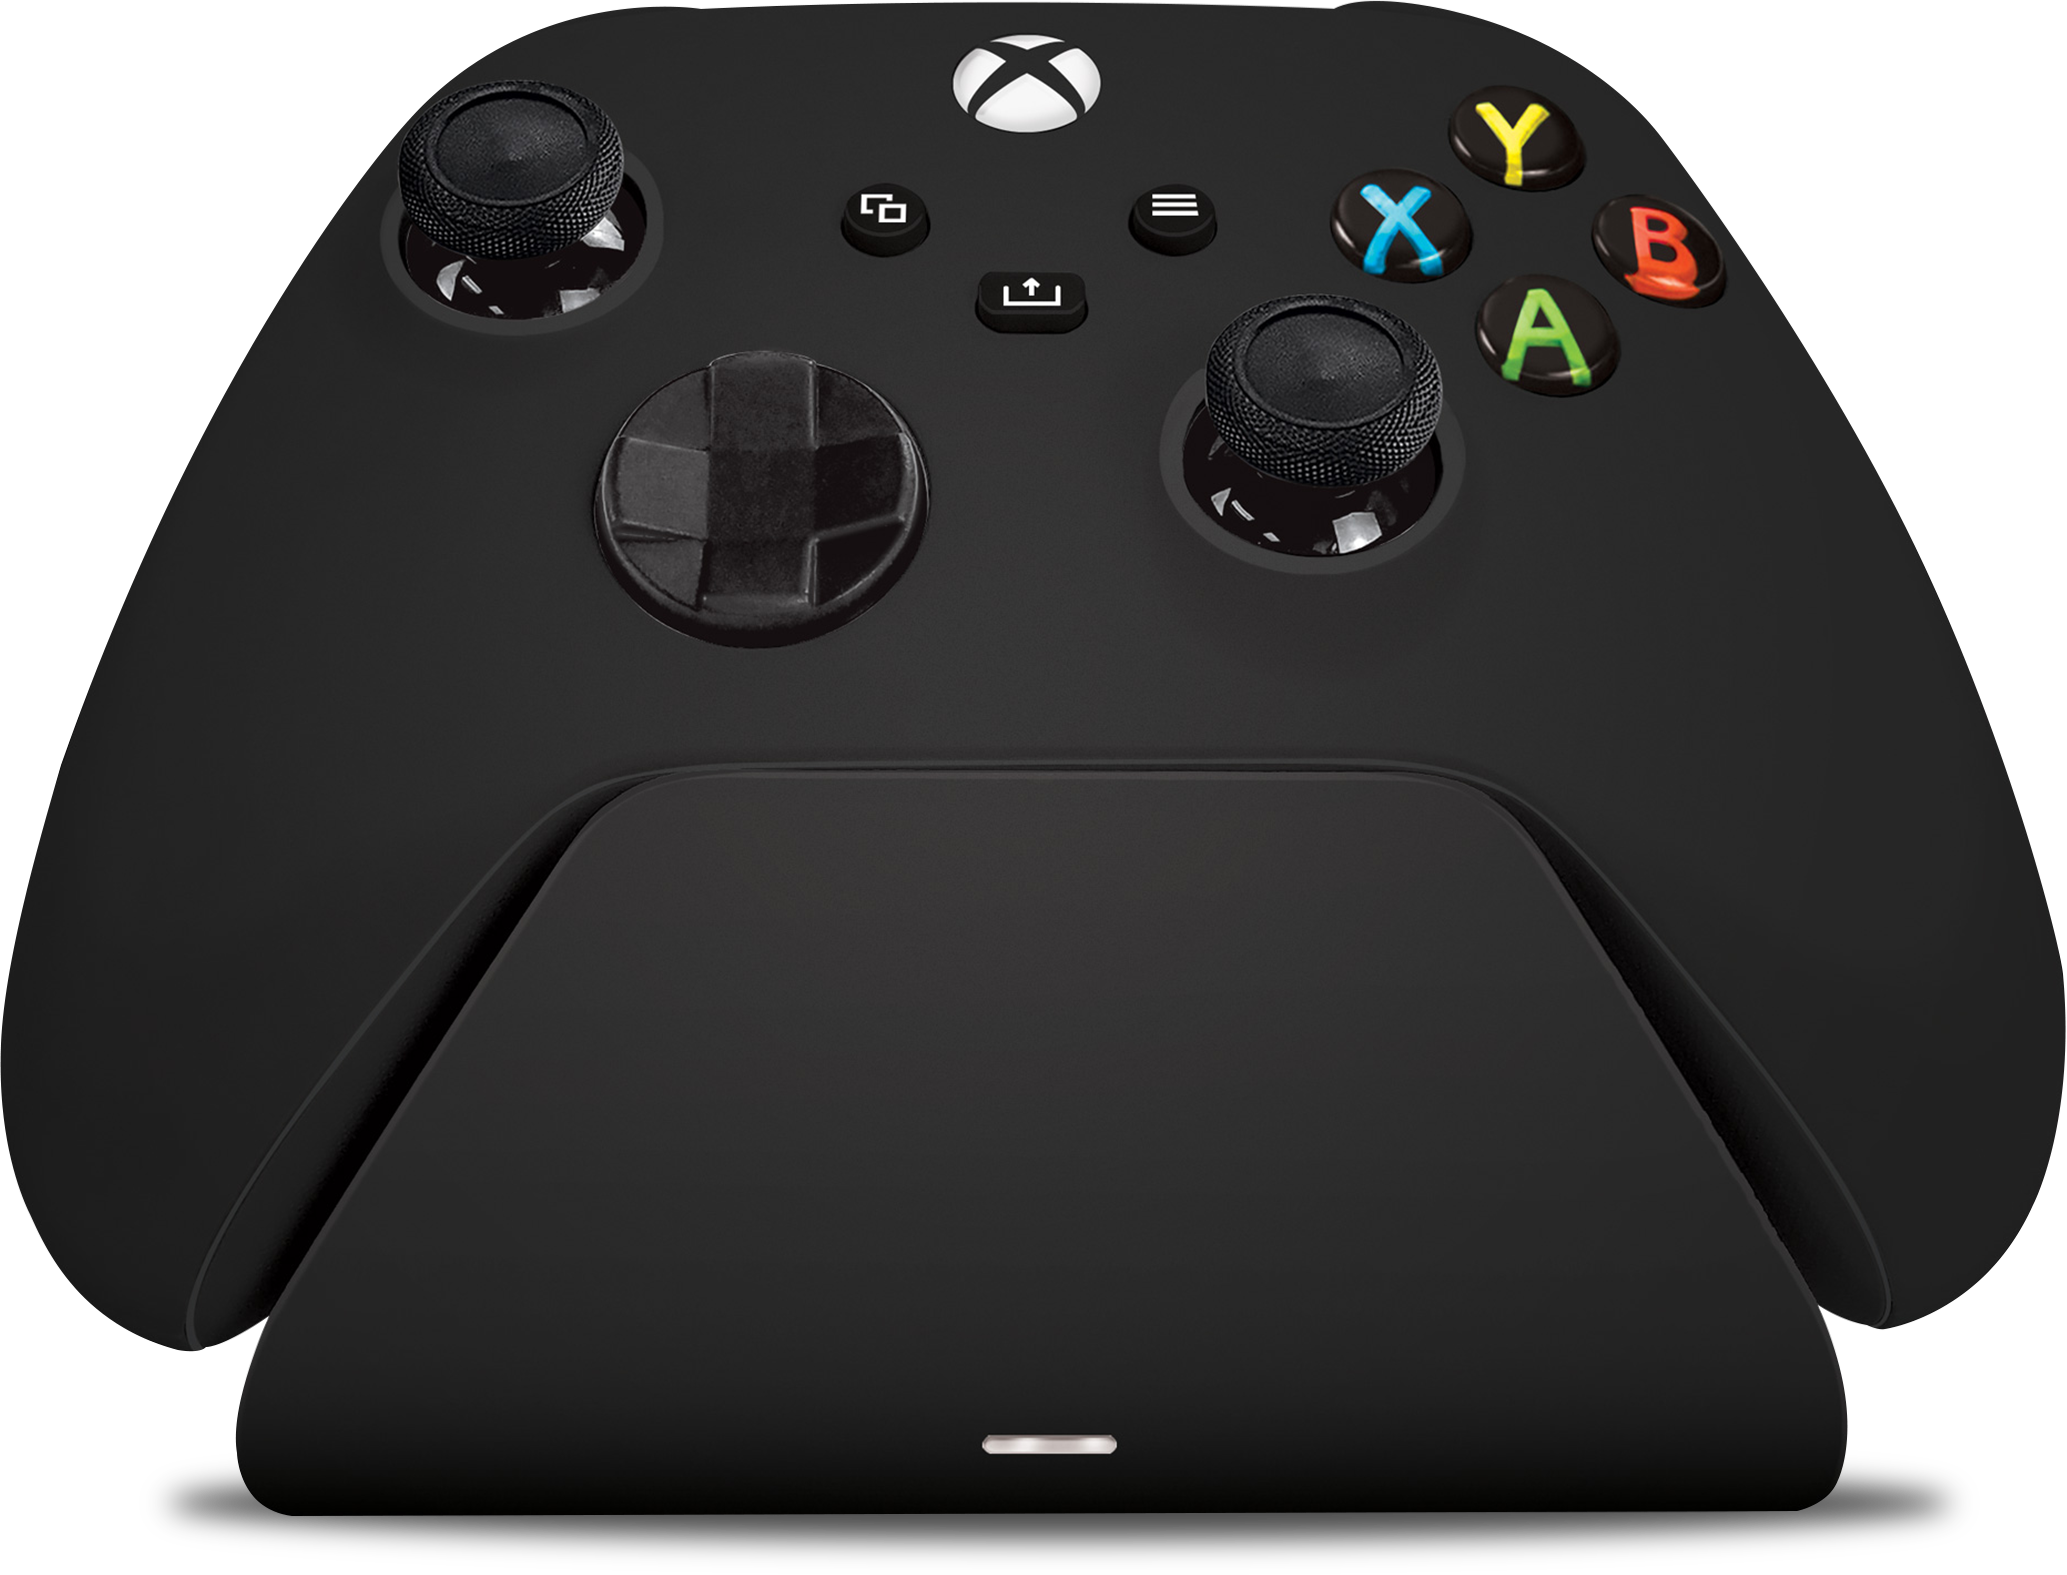 microsoft xbox one controller charging station